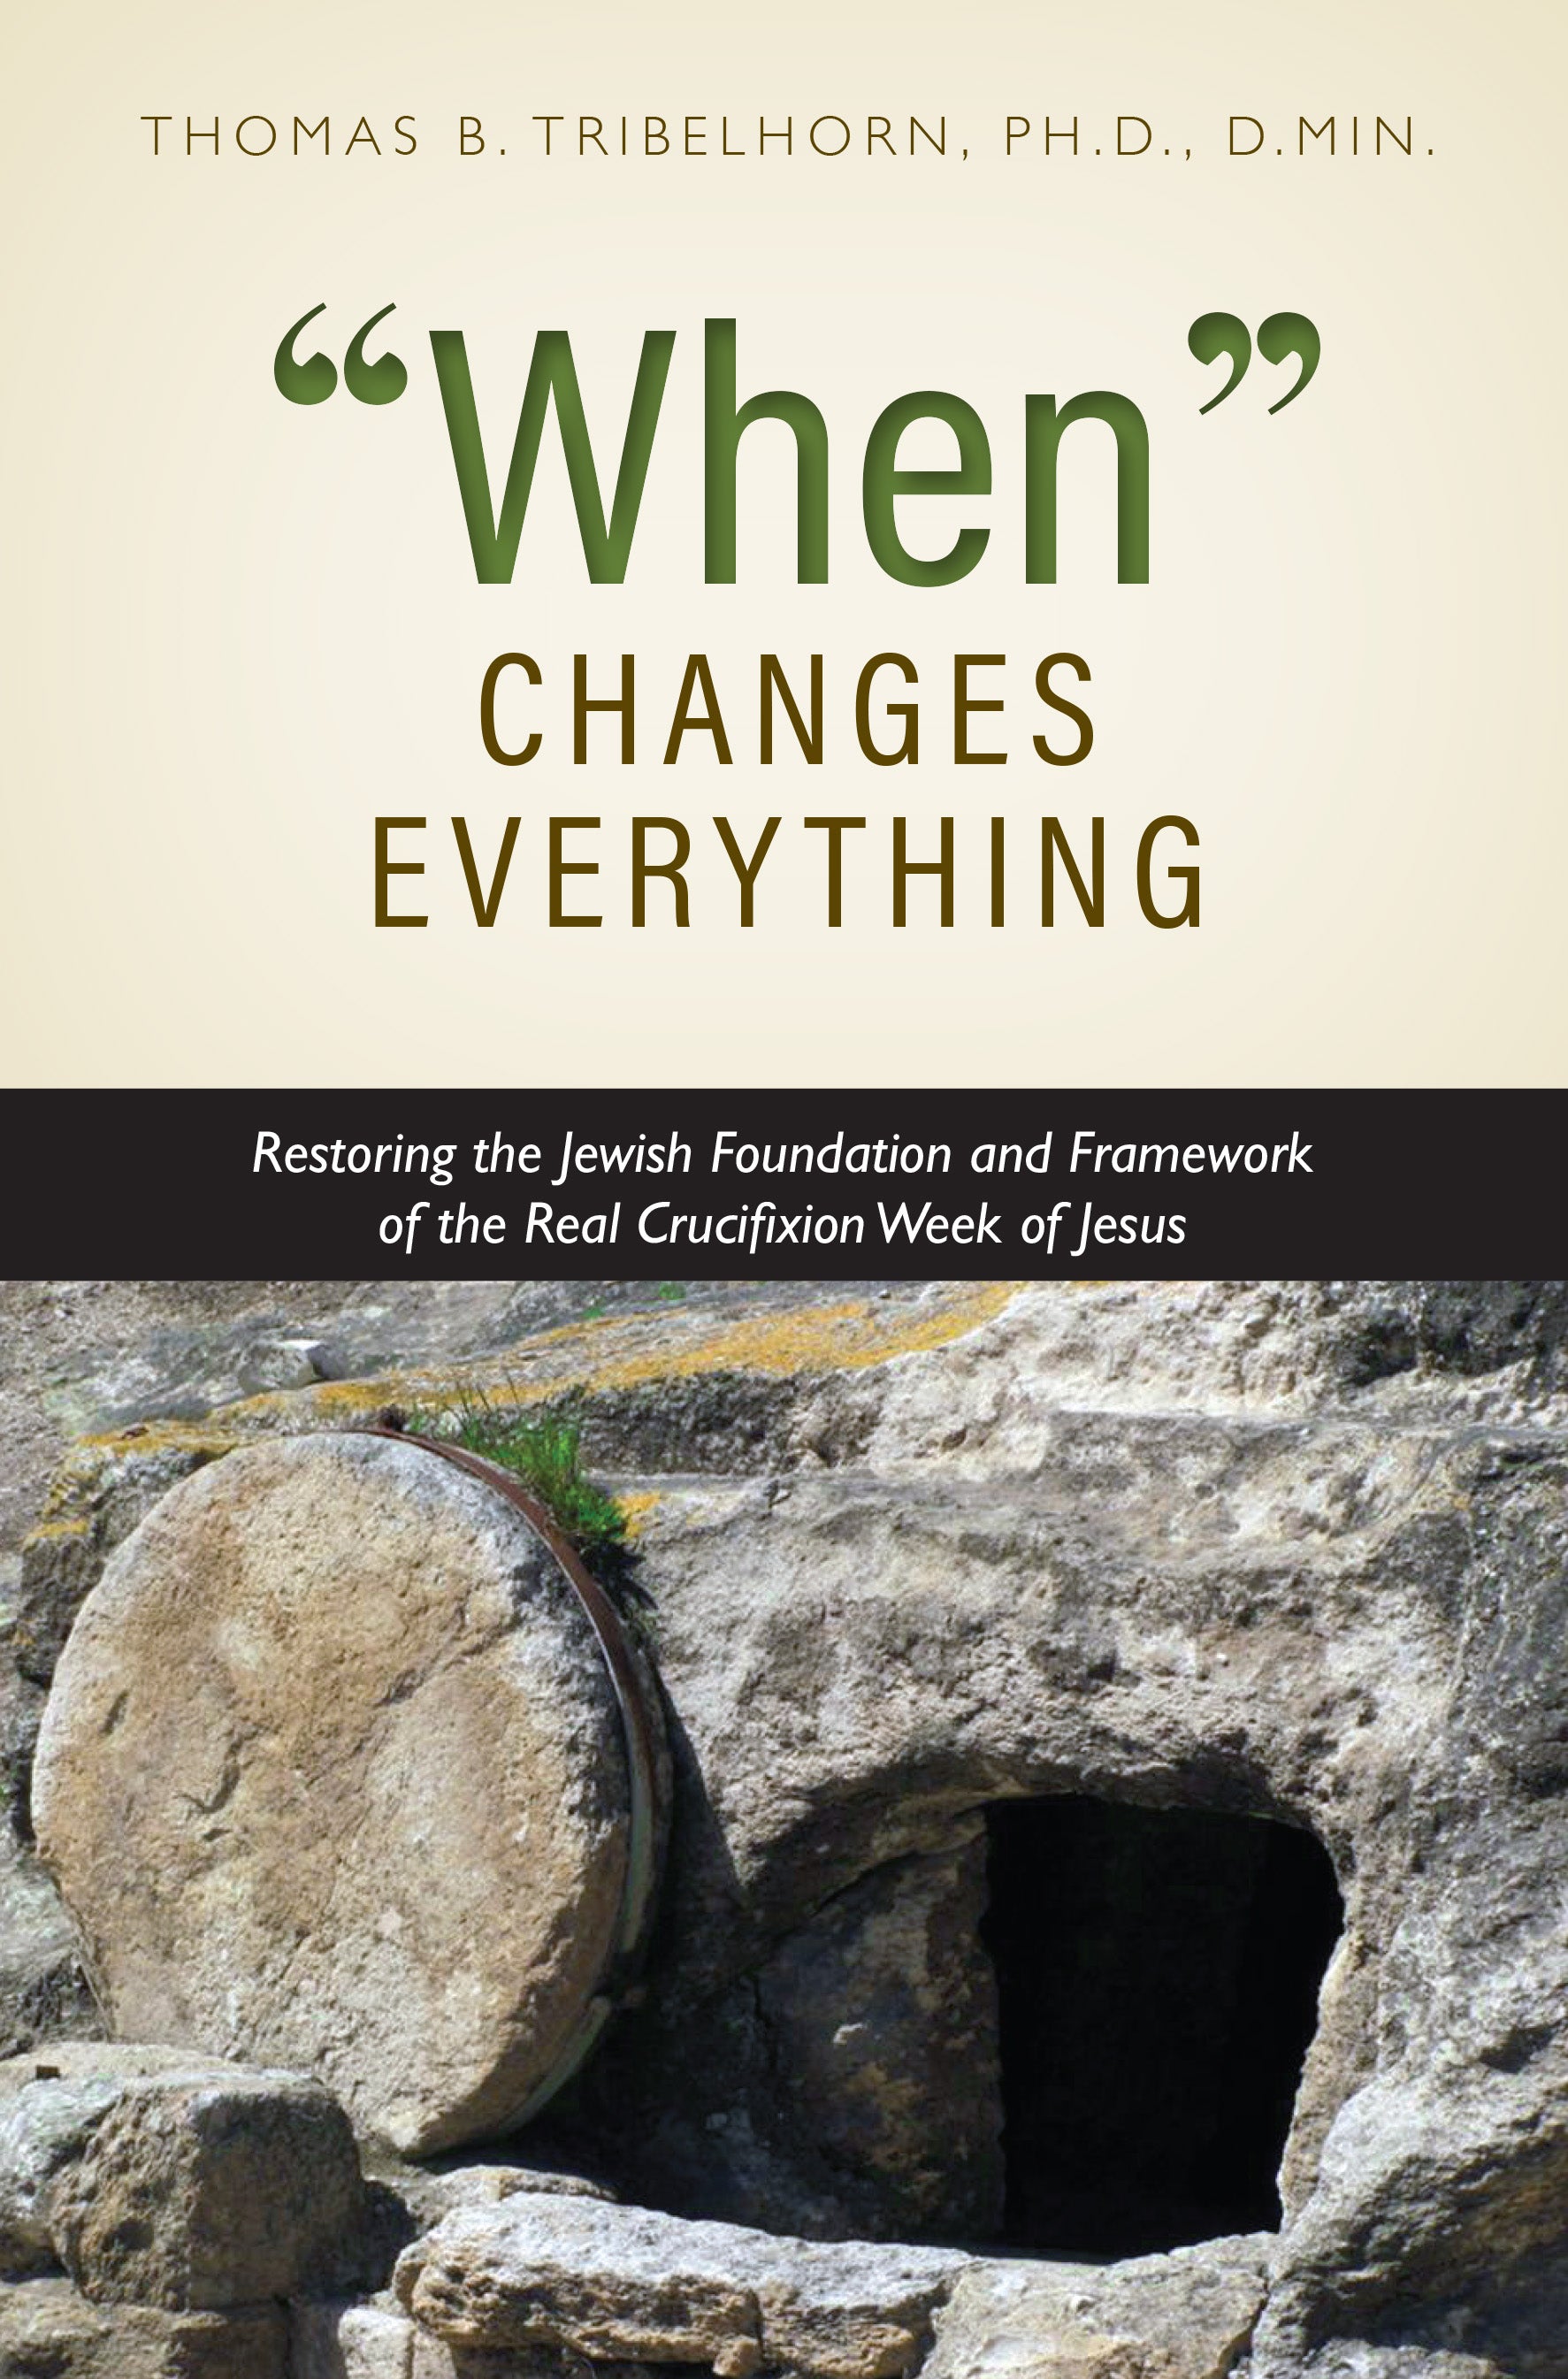 When Changes Everything: Restoring the Jewish Foundation and Framework of  the Real Crucifixion Week of Jesus: Thomas B. Tribelhorn